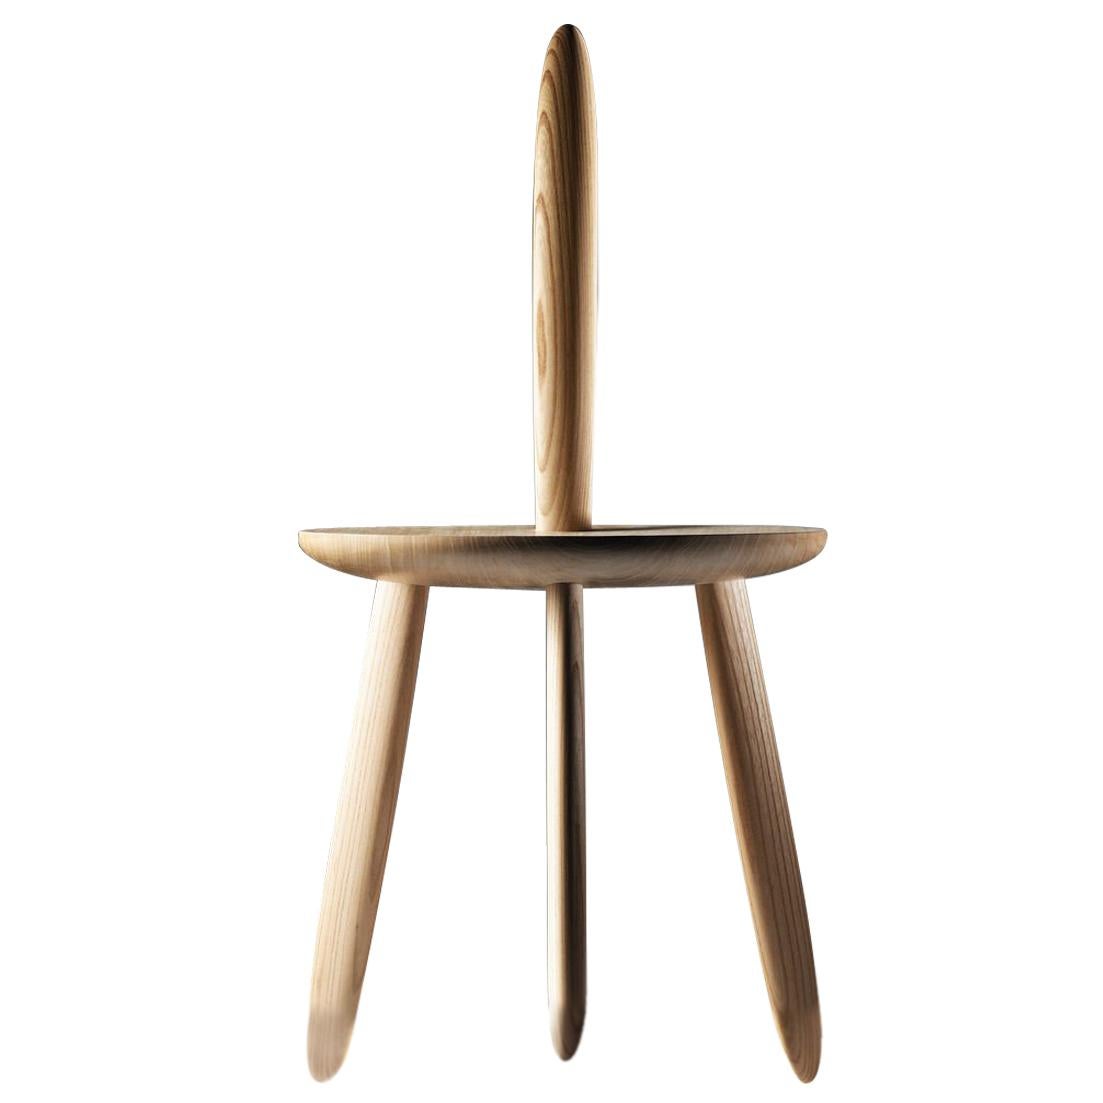 The original design concept of 3DWN1UP consists in the most simple and performative chair design, made of 5 wood parts taken from 1 single piece of wood. The piece is part of the Wood collection of Aldo Bakker. The artist has explored this design